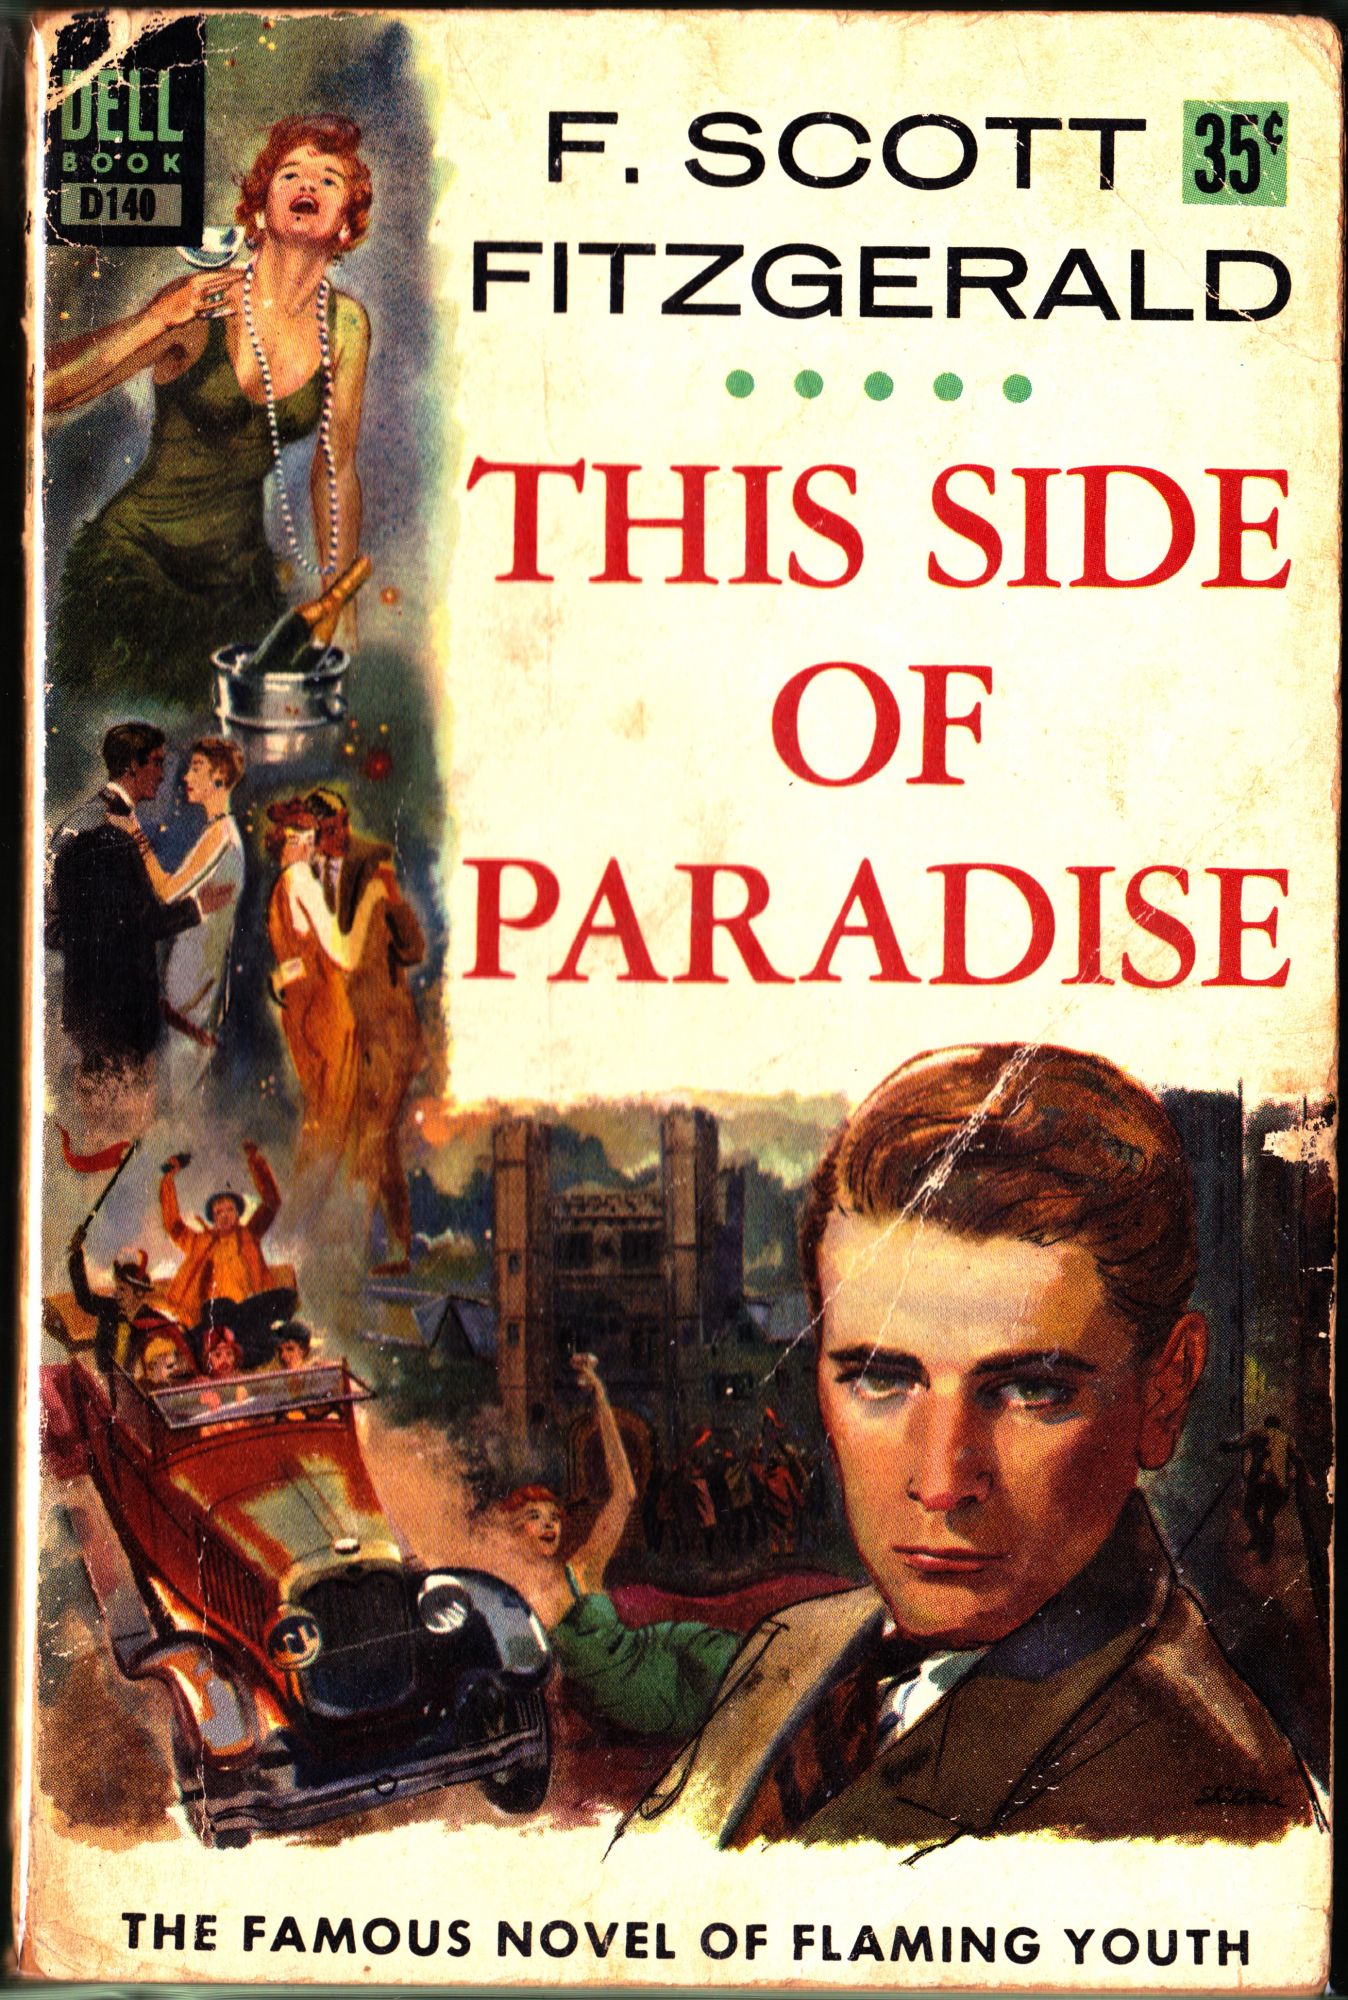 This　Scott　F.　Side　Paradise　of　Fitzgerald